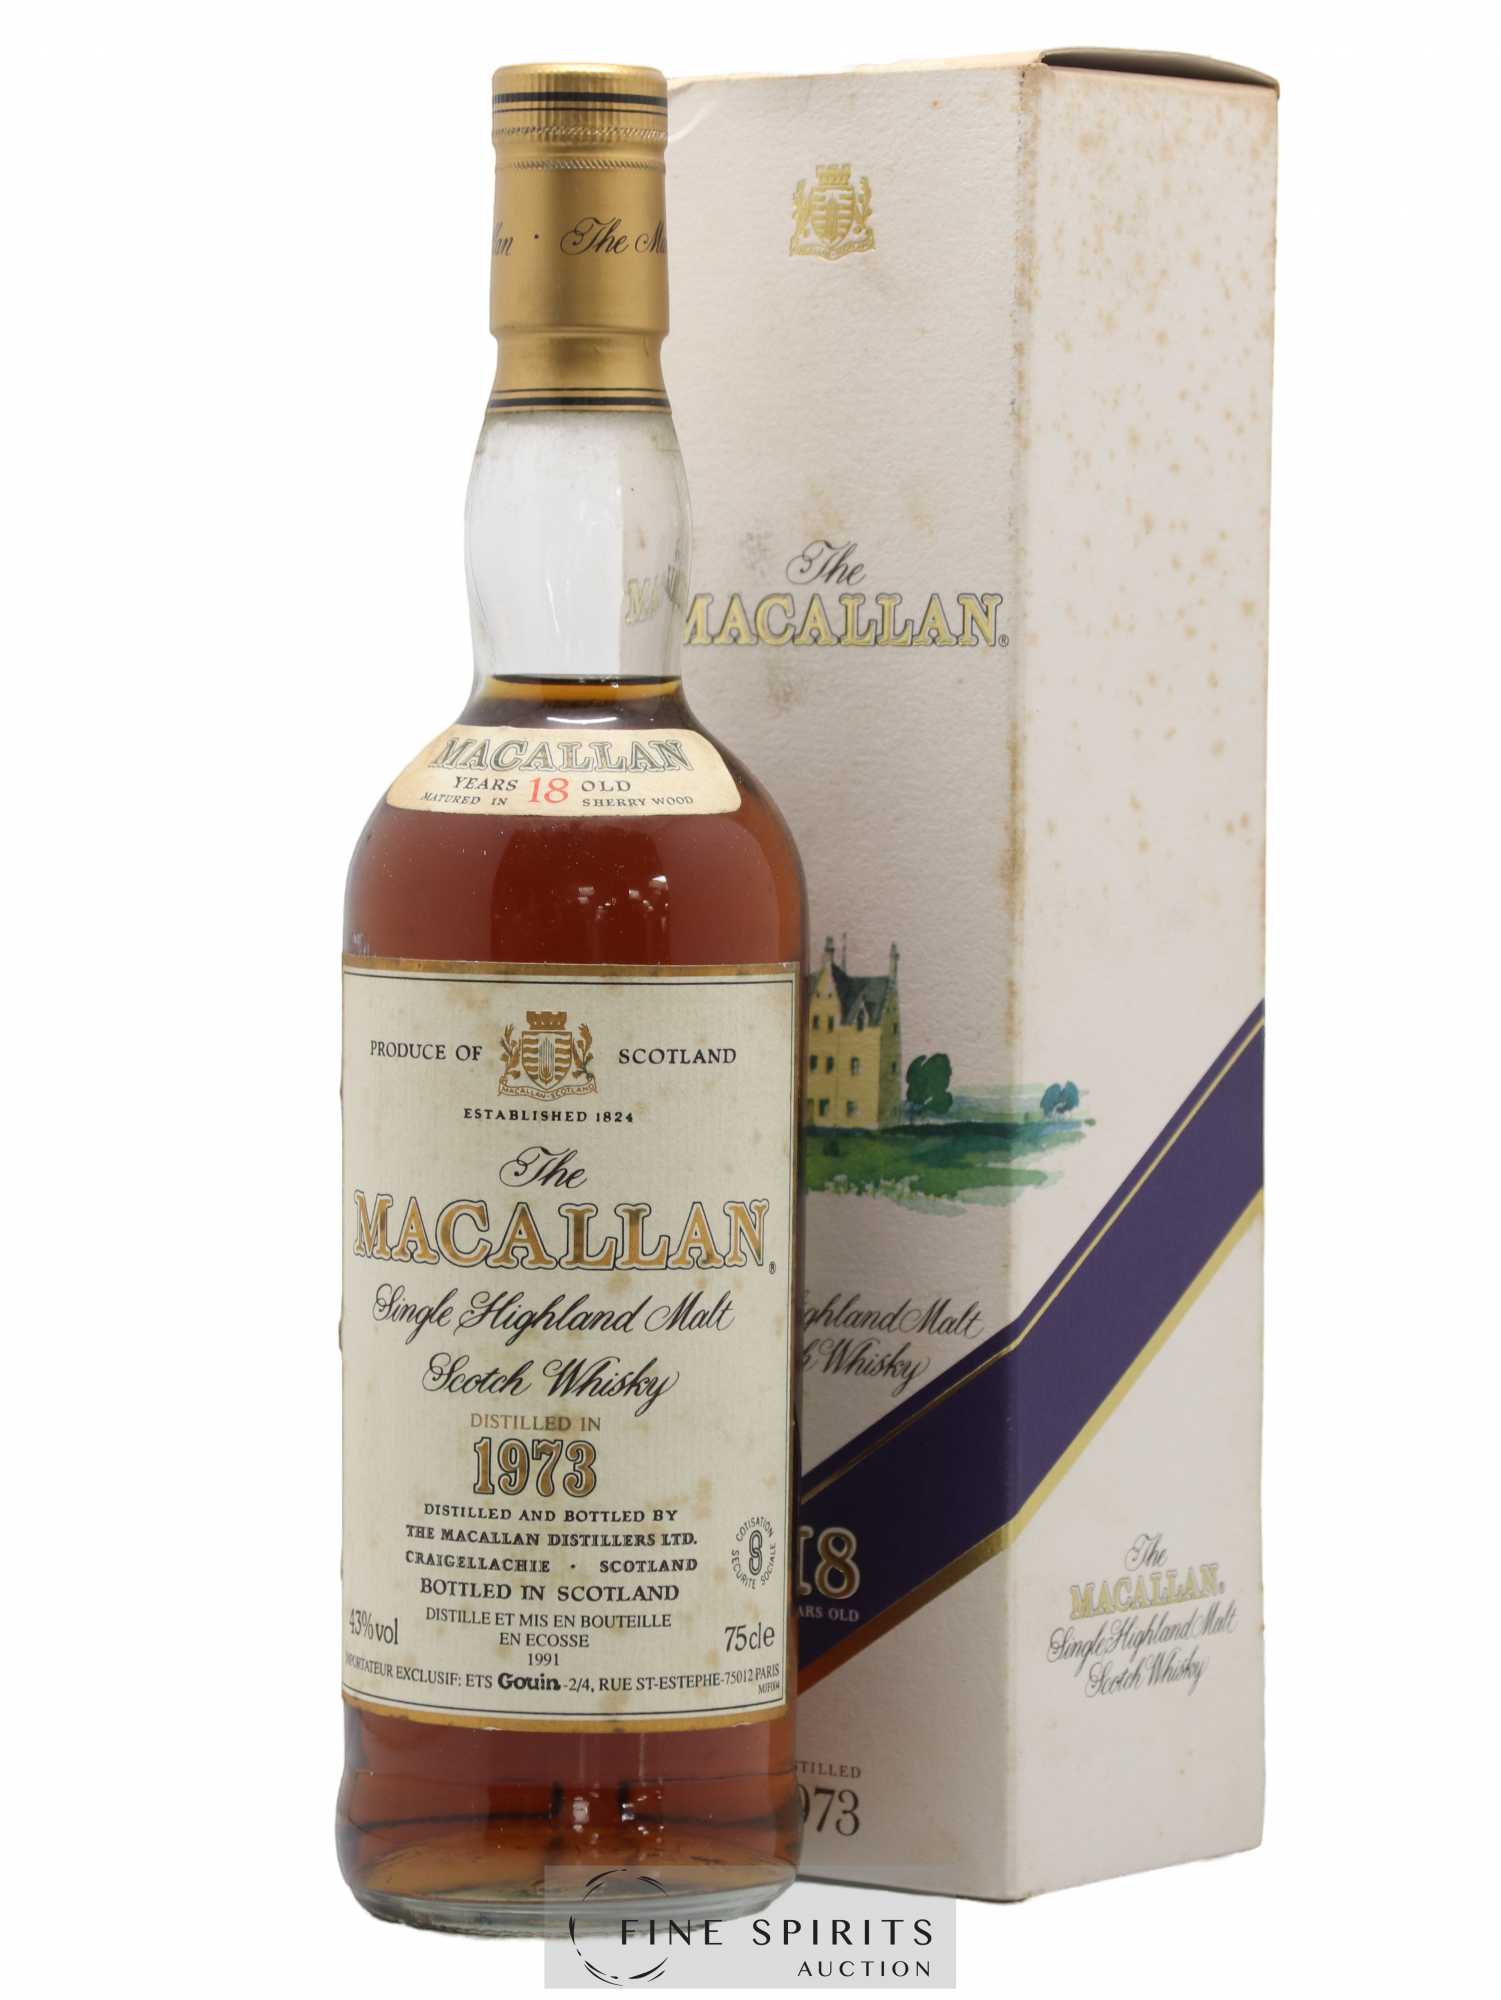 Macallan (The) 18 years 1973 Of. Sherry Wood Matured - bottled 1991 Gouin Import